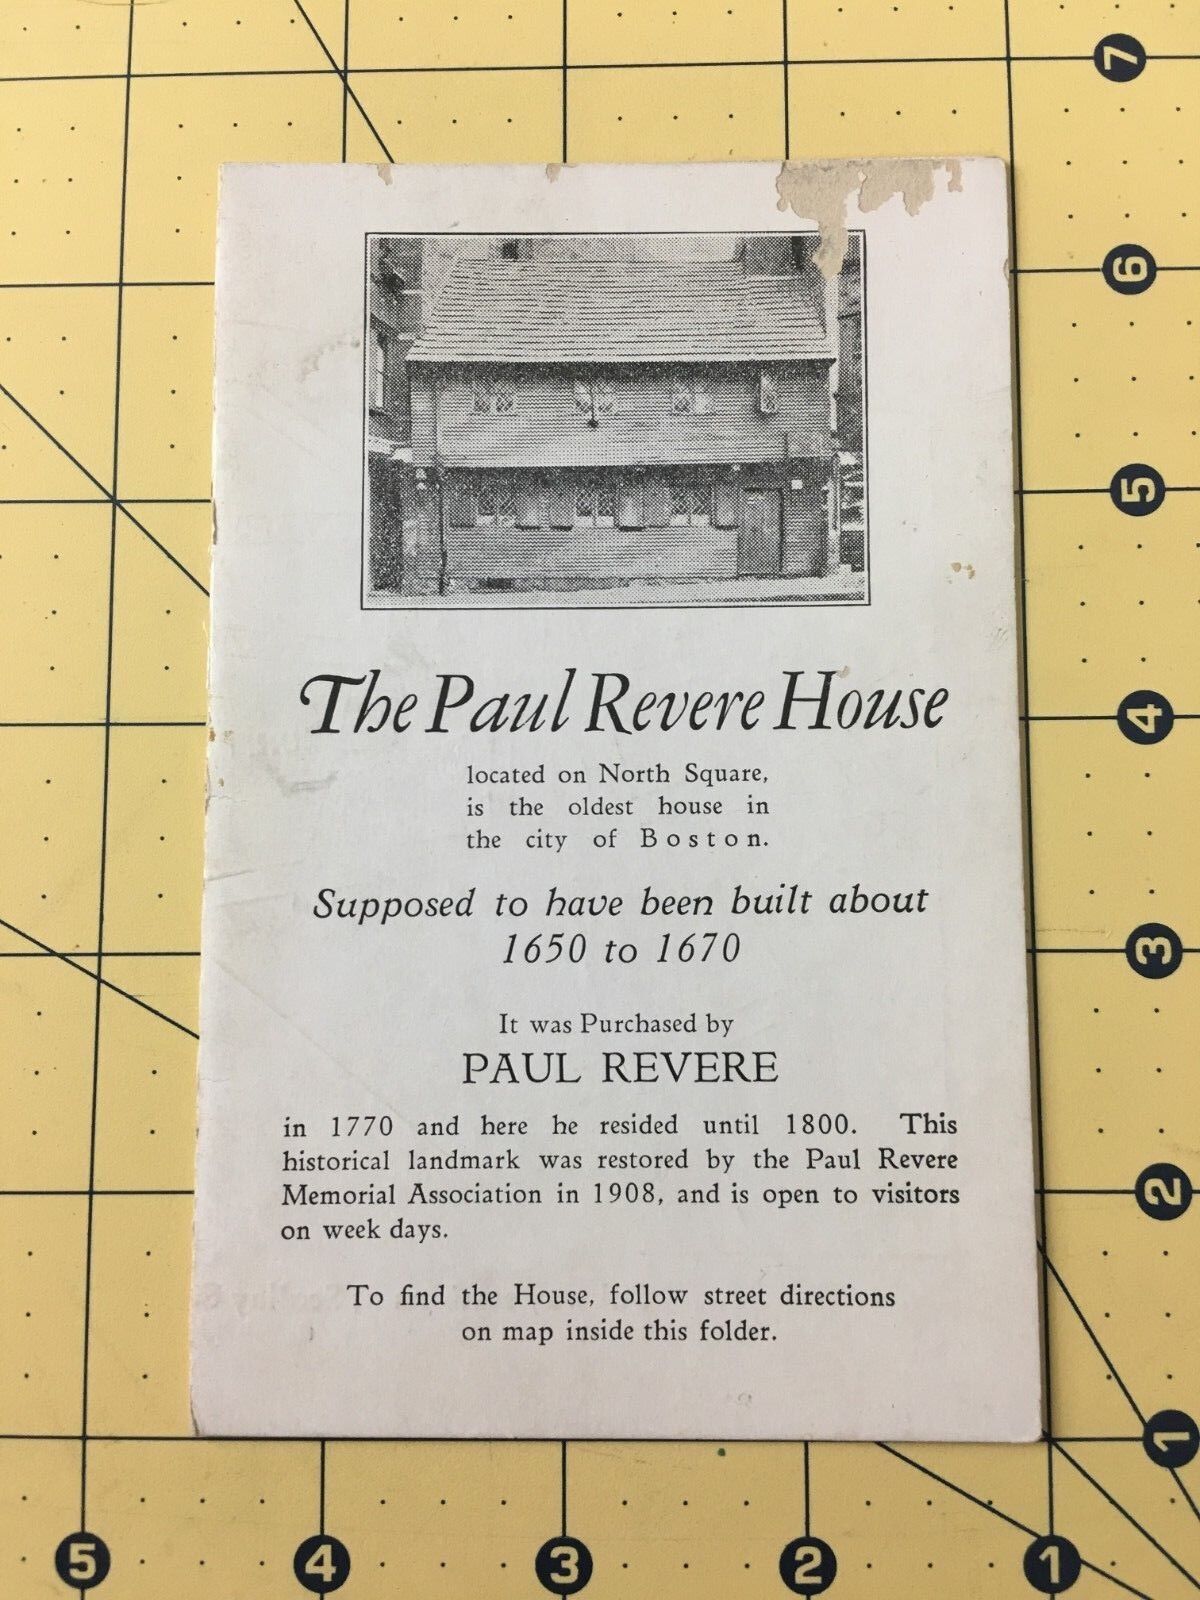 Vintage The Paul Revere House Travel Brochure with Directions to his House